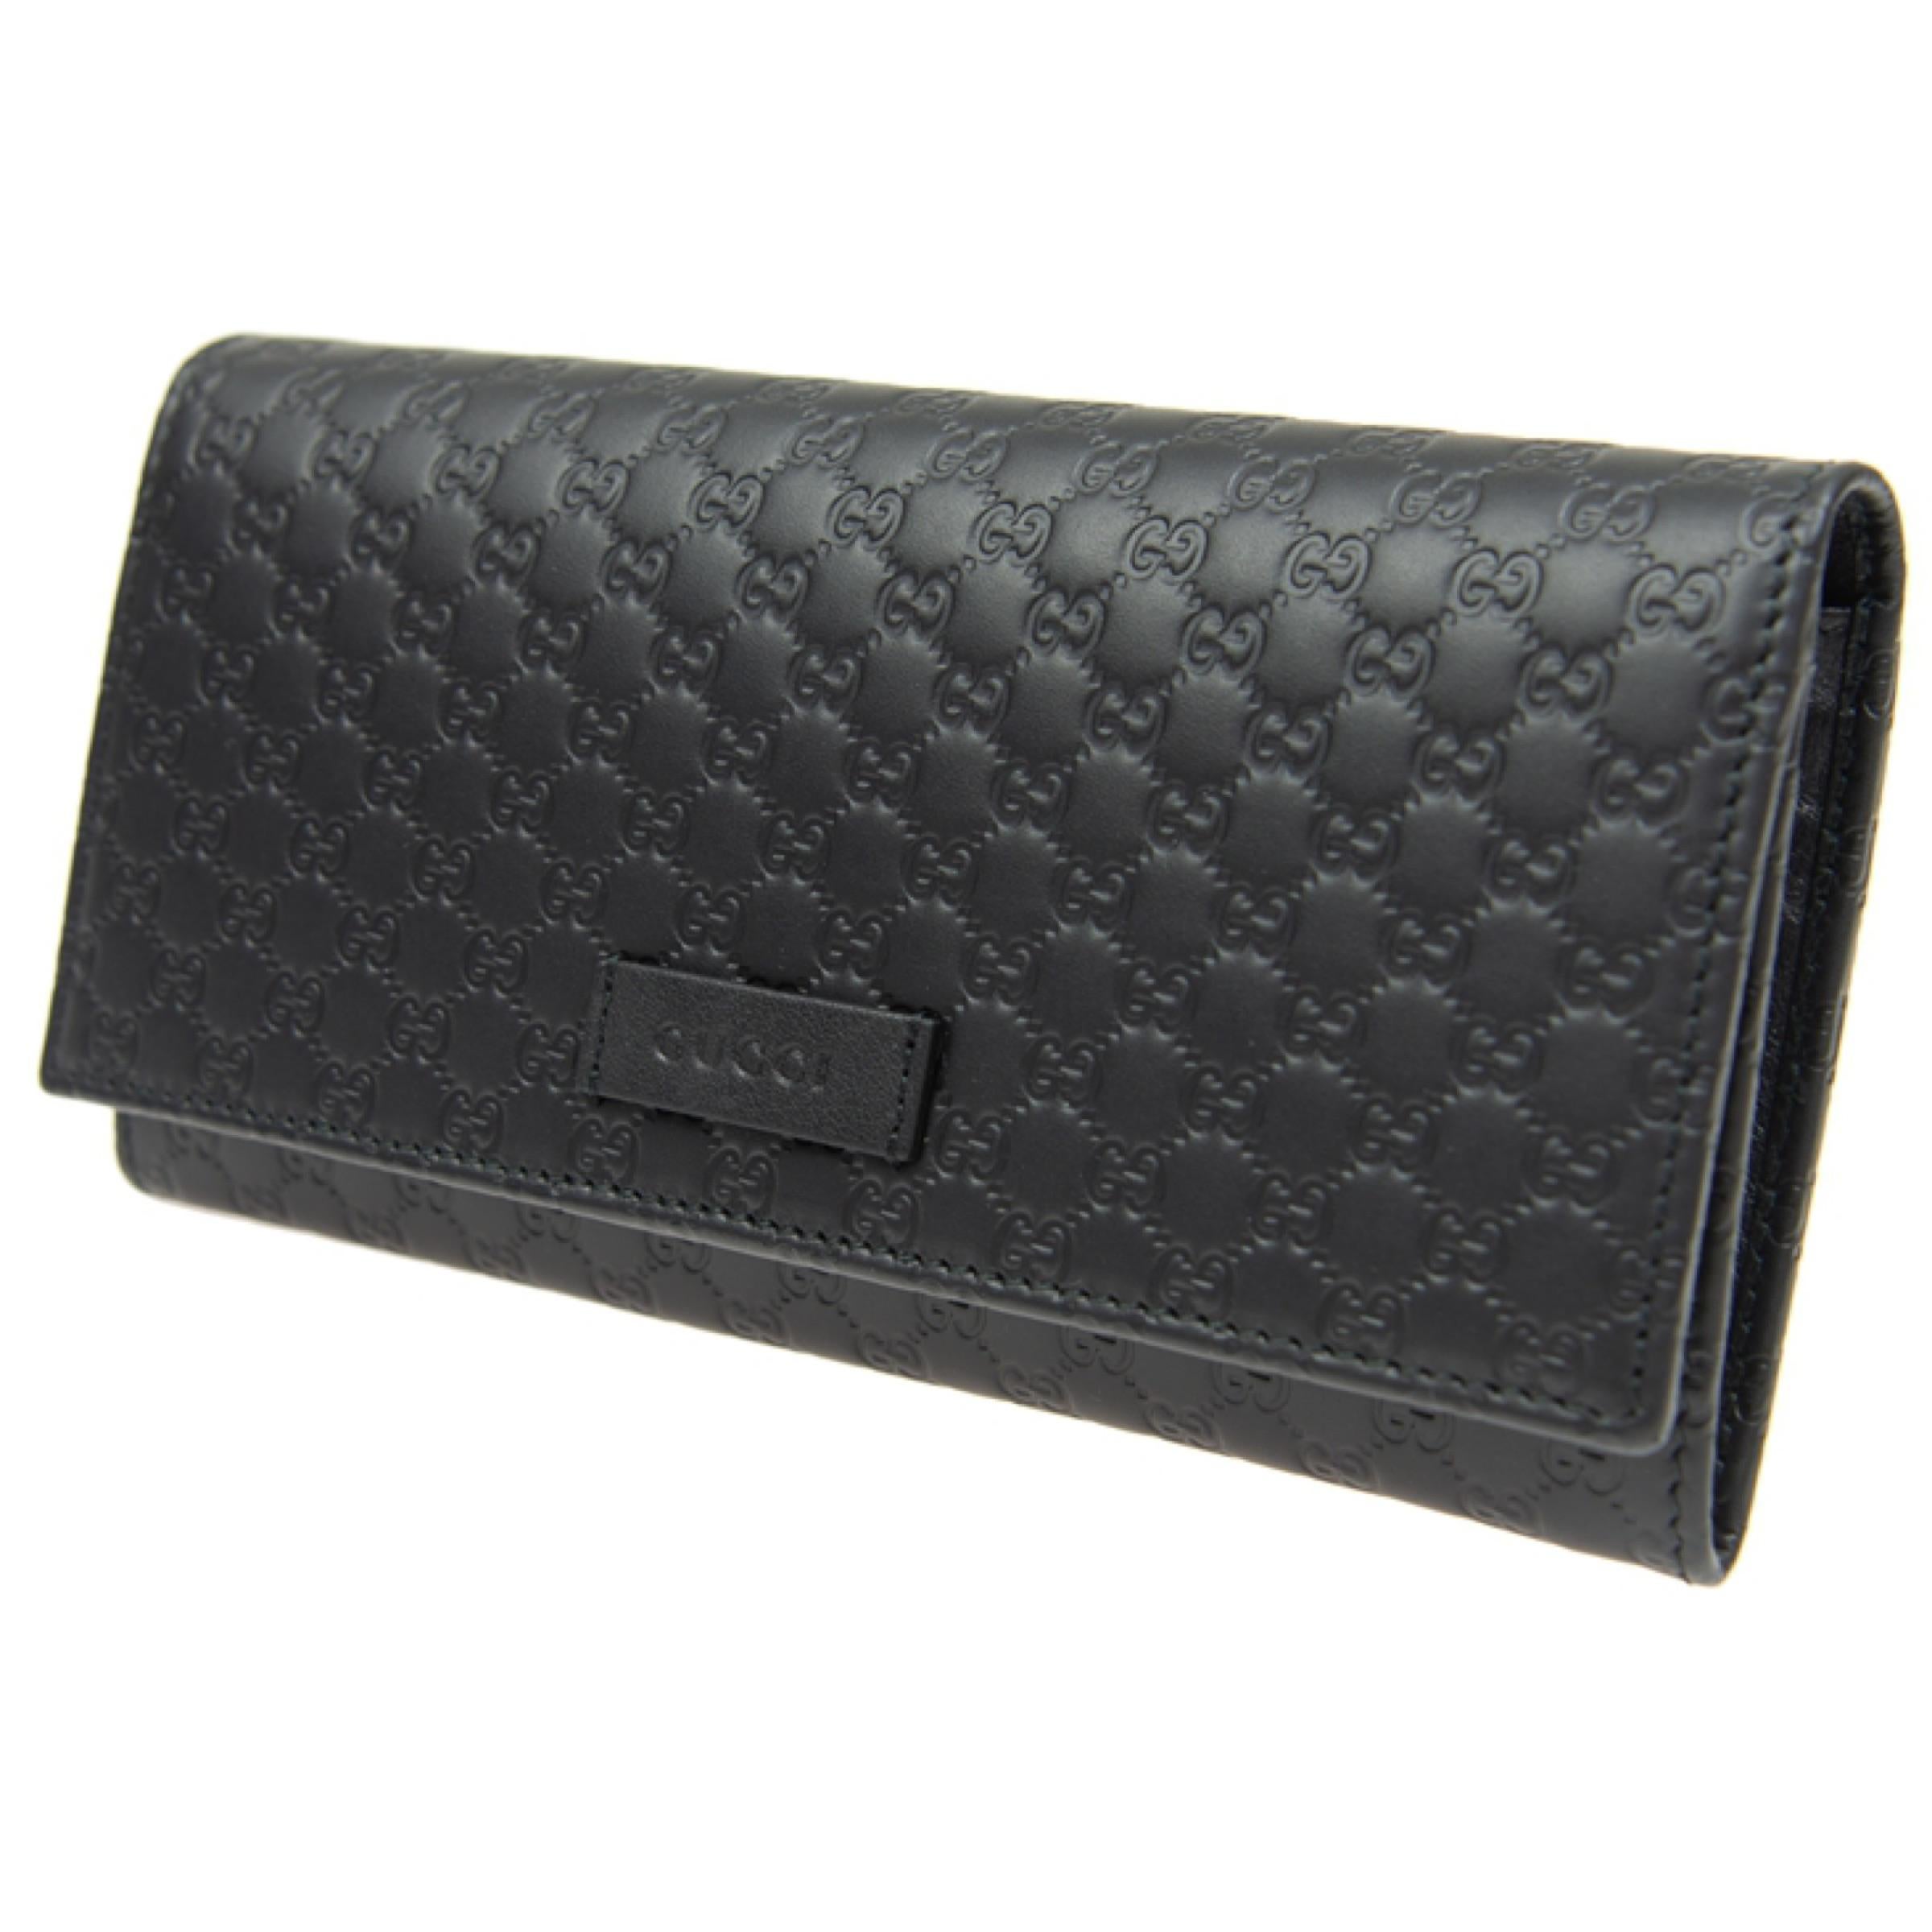 Women's or Men's NEW Gucci Black GG Guccissima Monogram Leather Long Wallet Clutch Bag